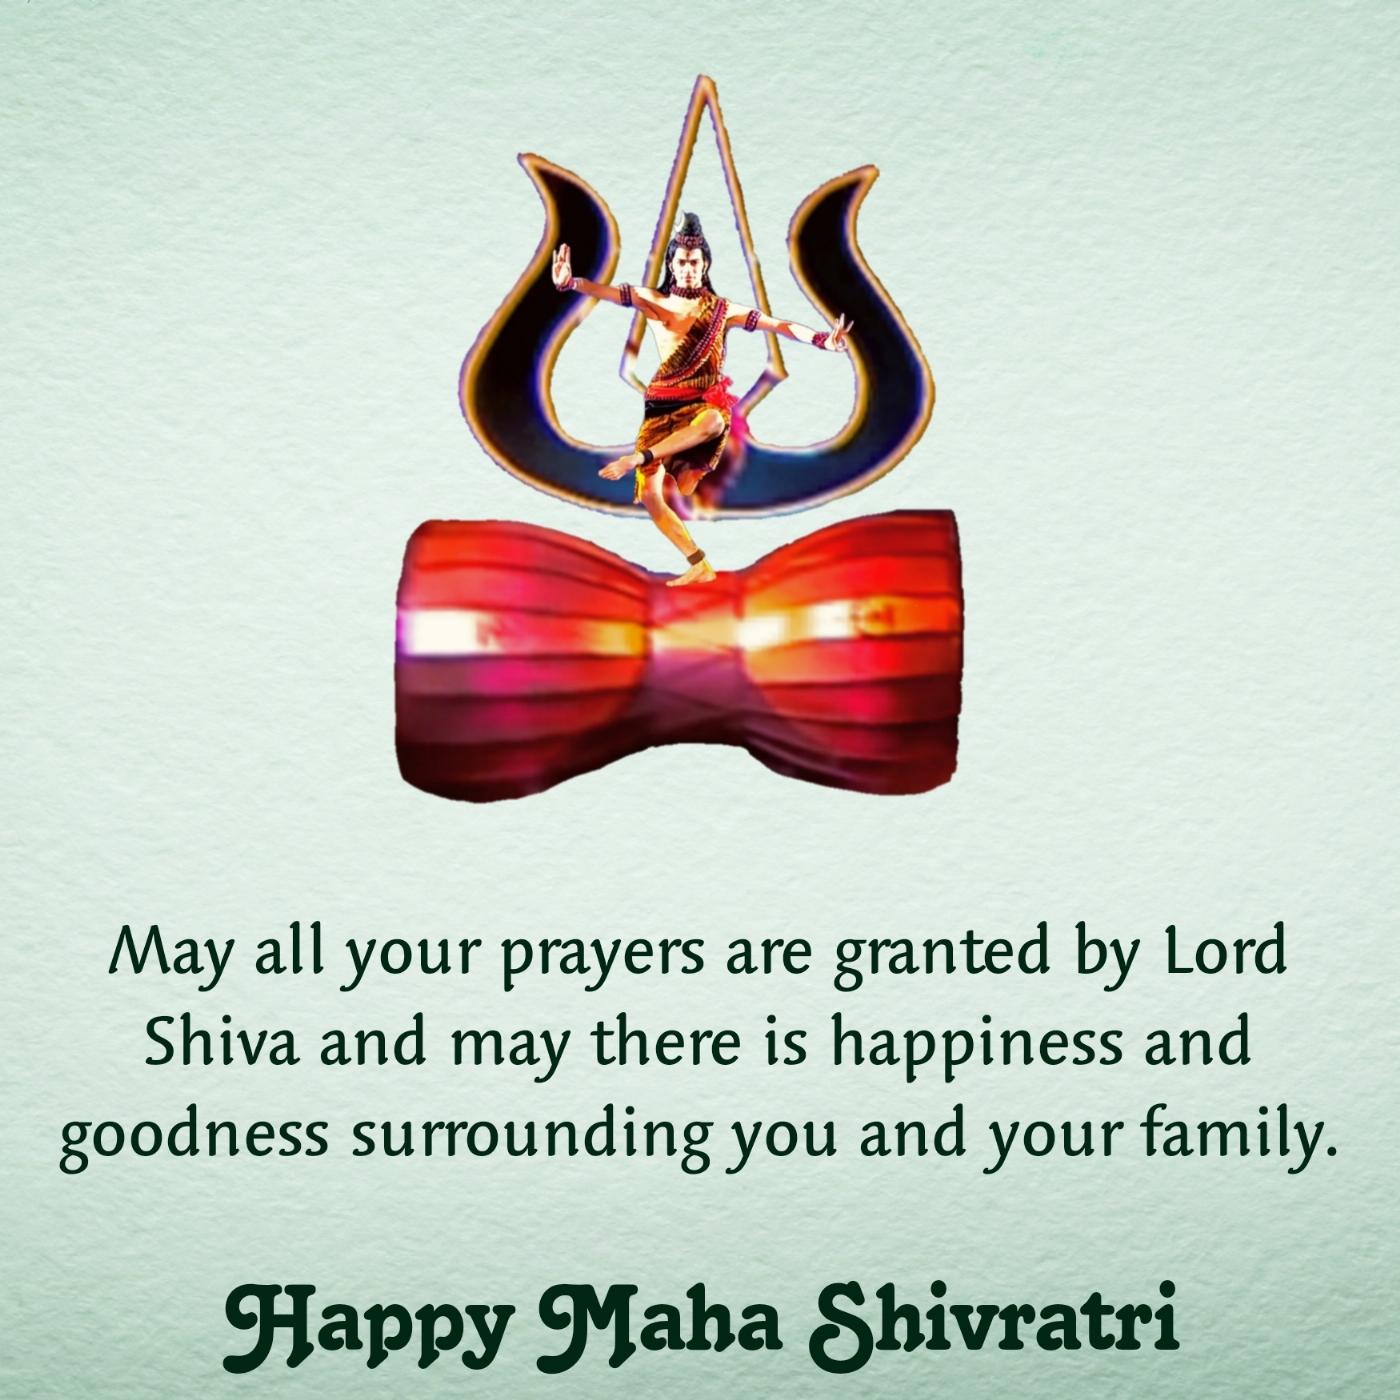 May all your prayers are granted by Lord Shiva